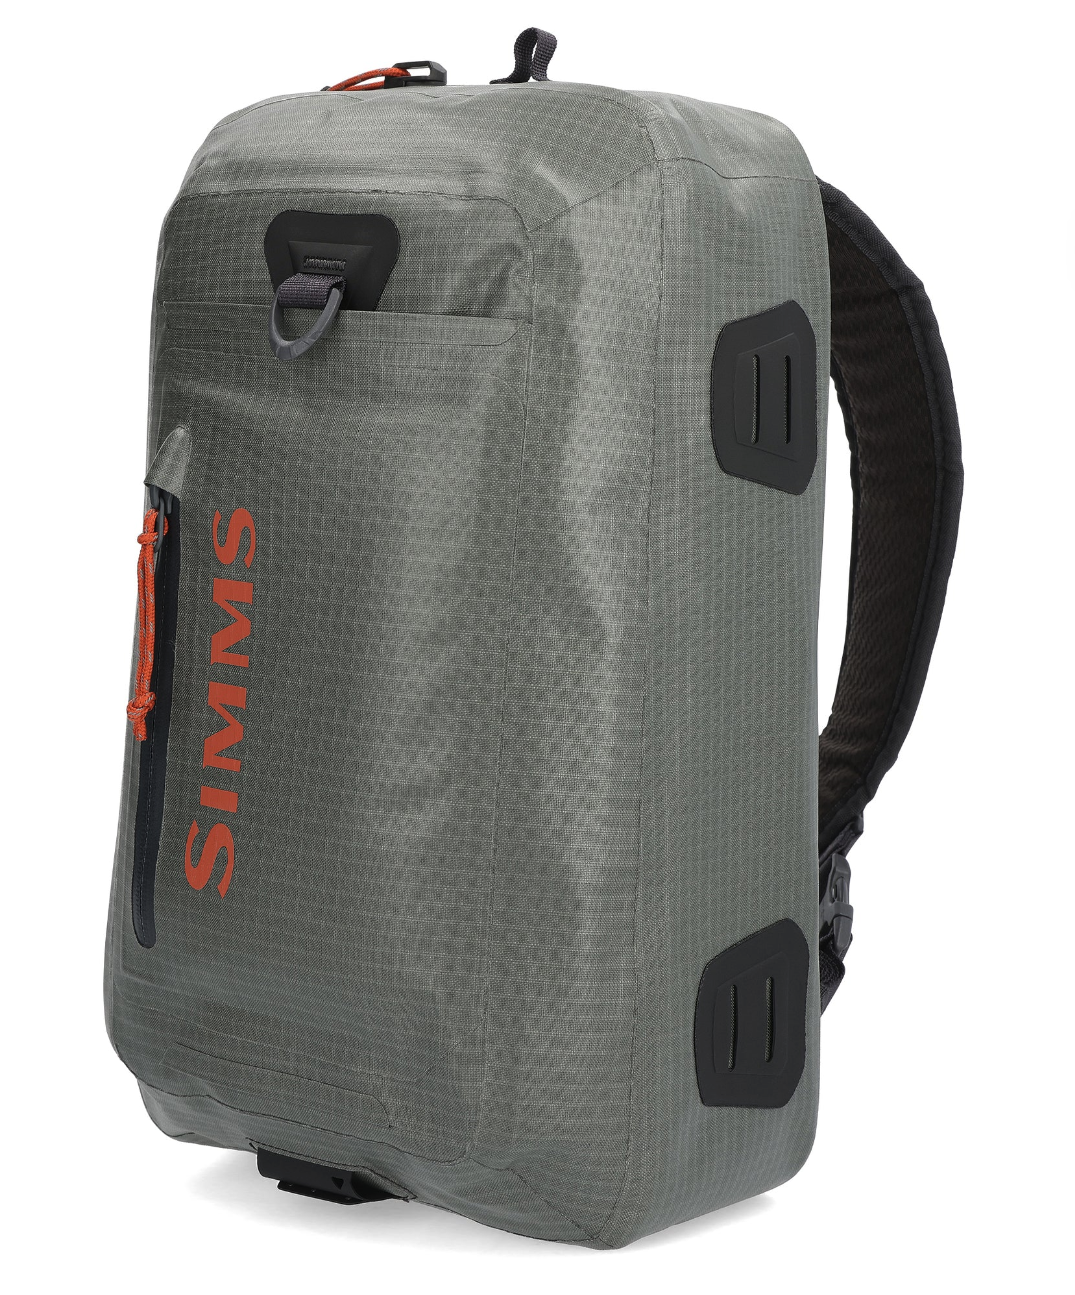 Simms Fly Fishing Packs For Sale